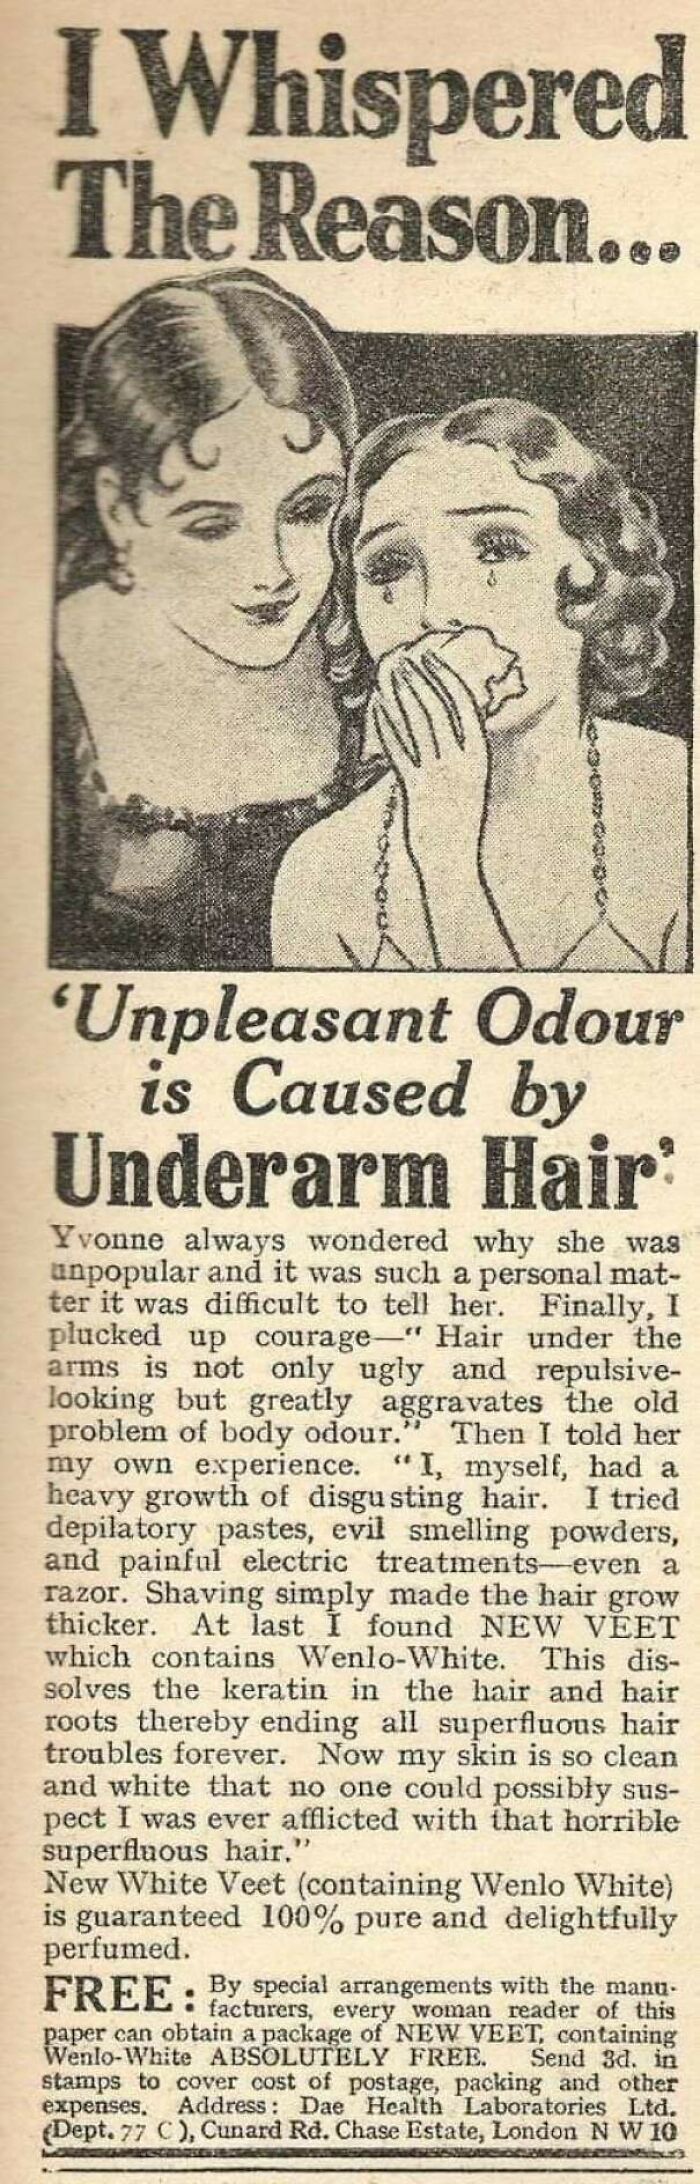 Unpleasant Odour Is Caused By Underarm Hair (1930s)